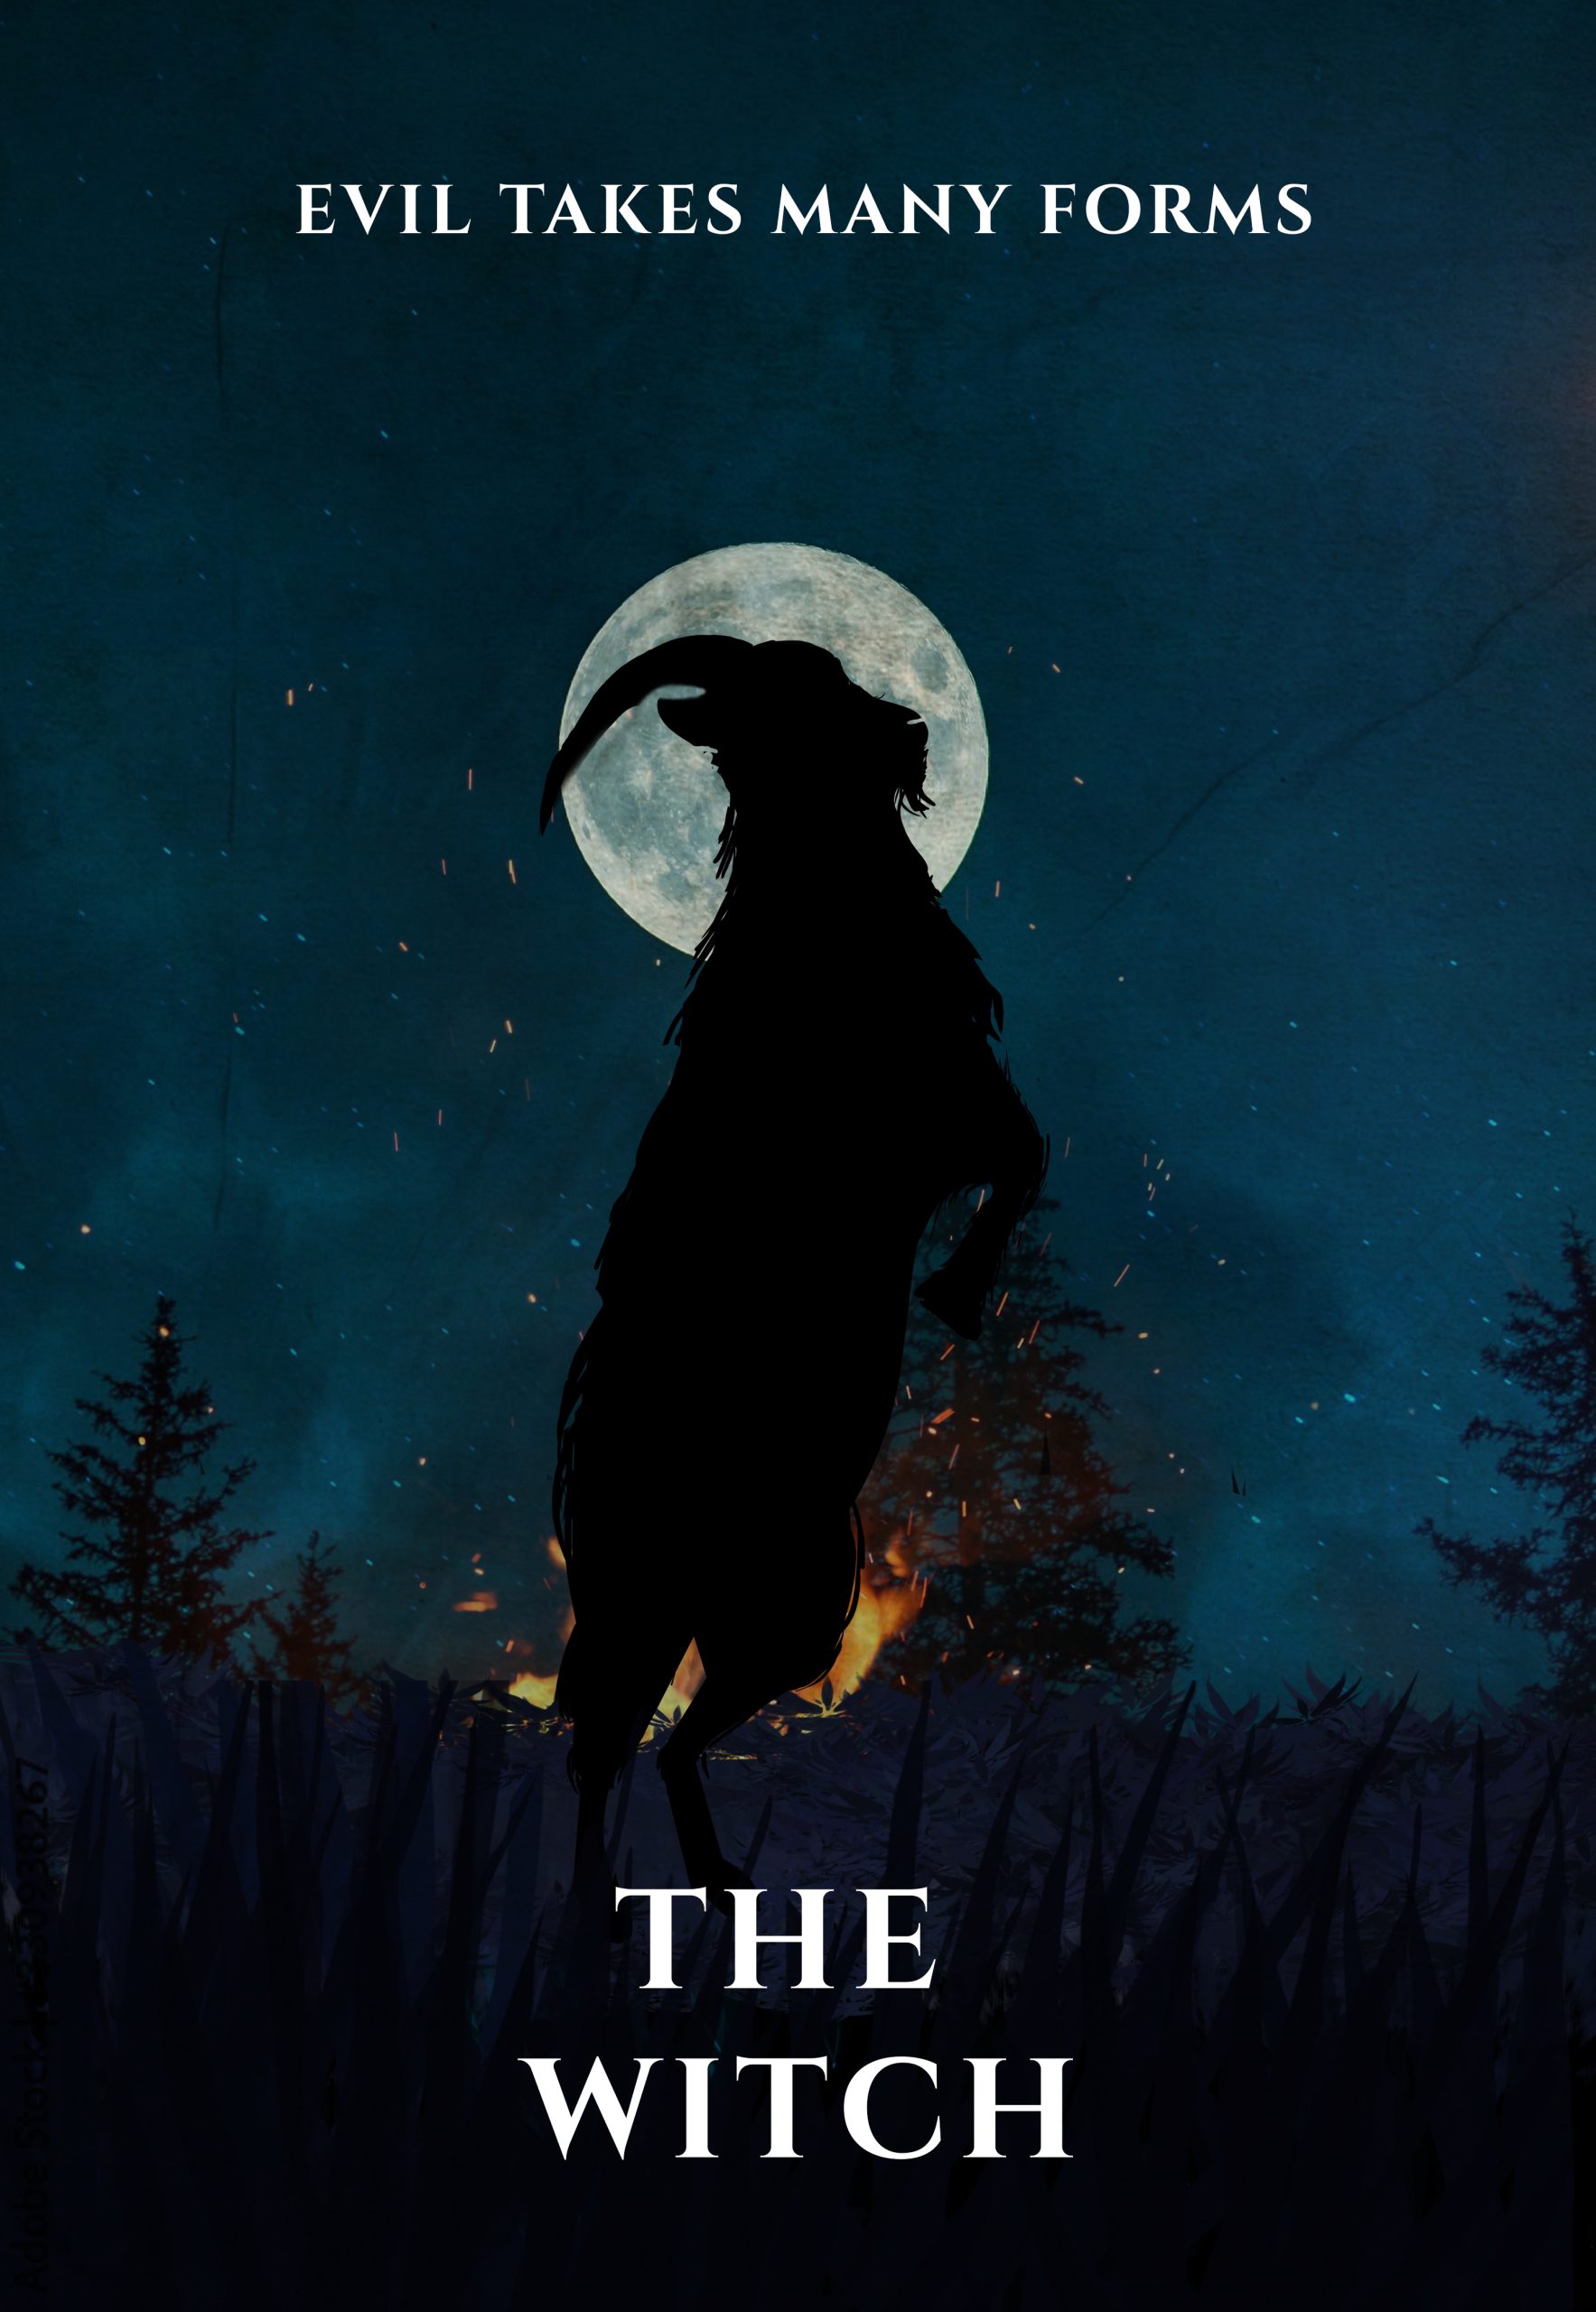 The Witch (Evil takes many forms)